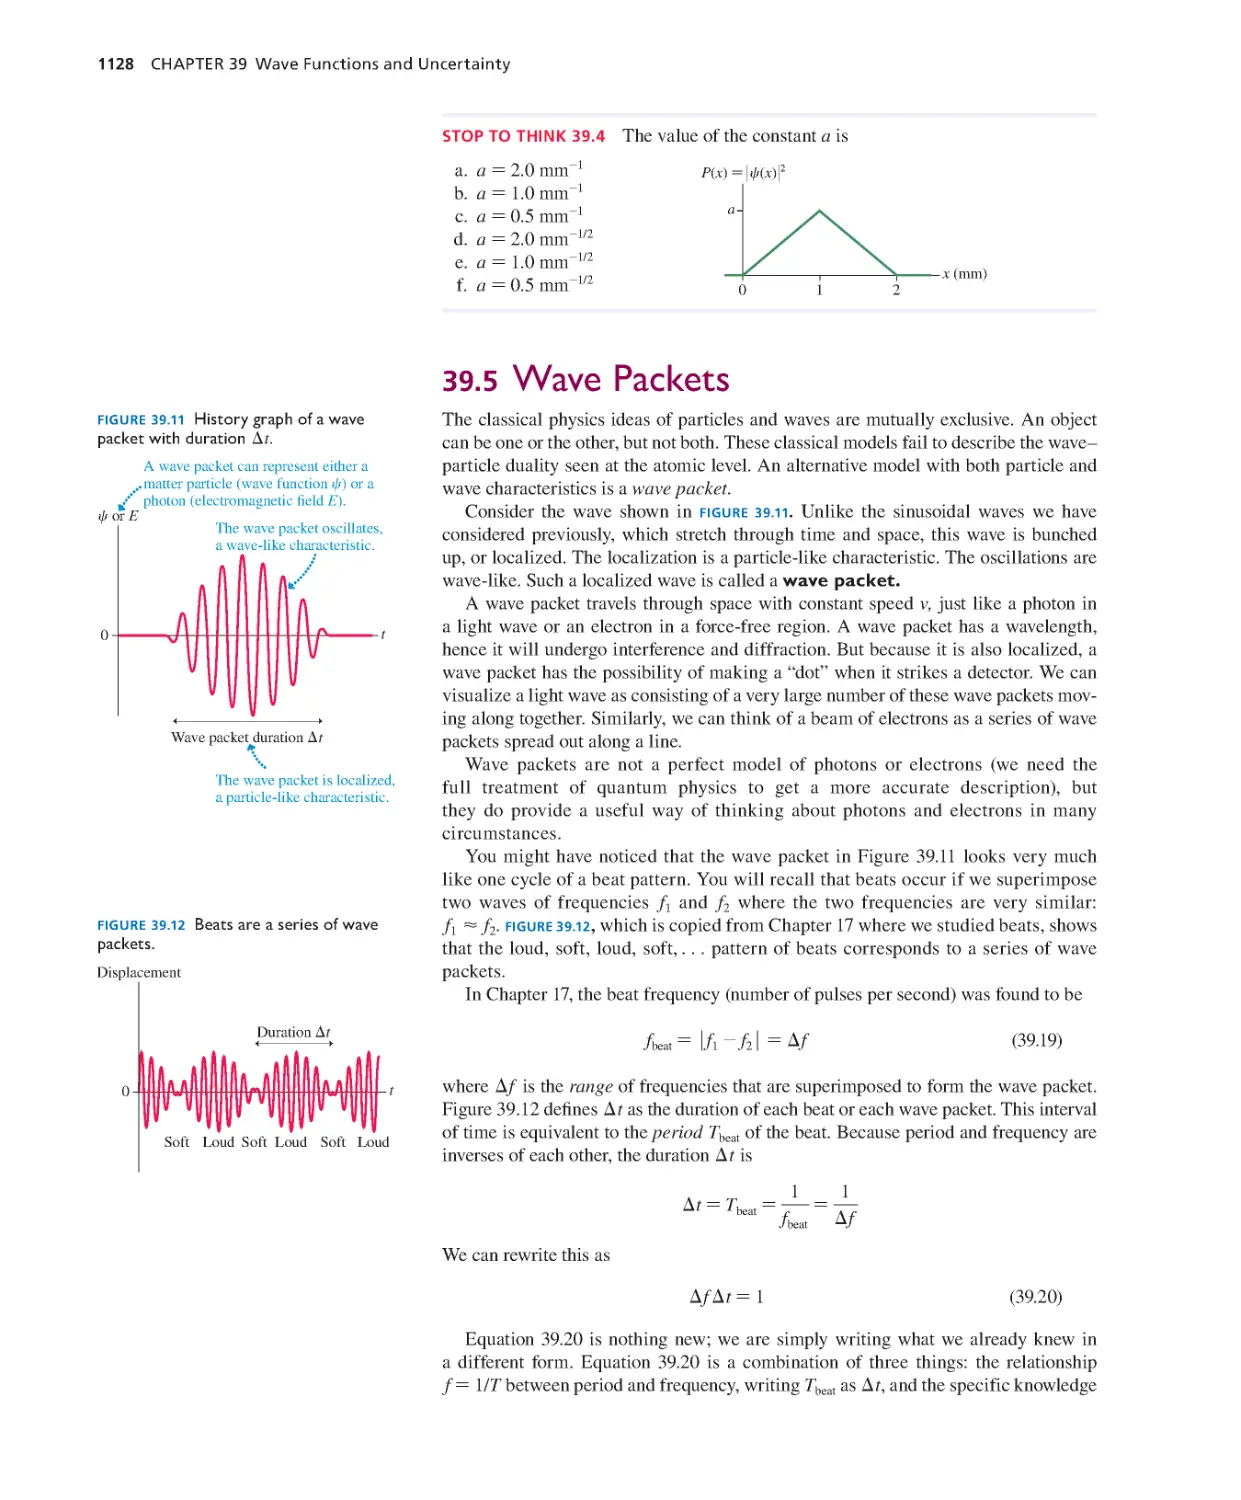 39.5. Wave Packets